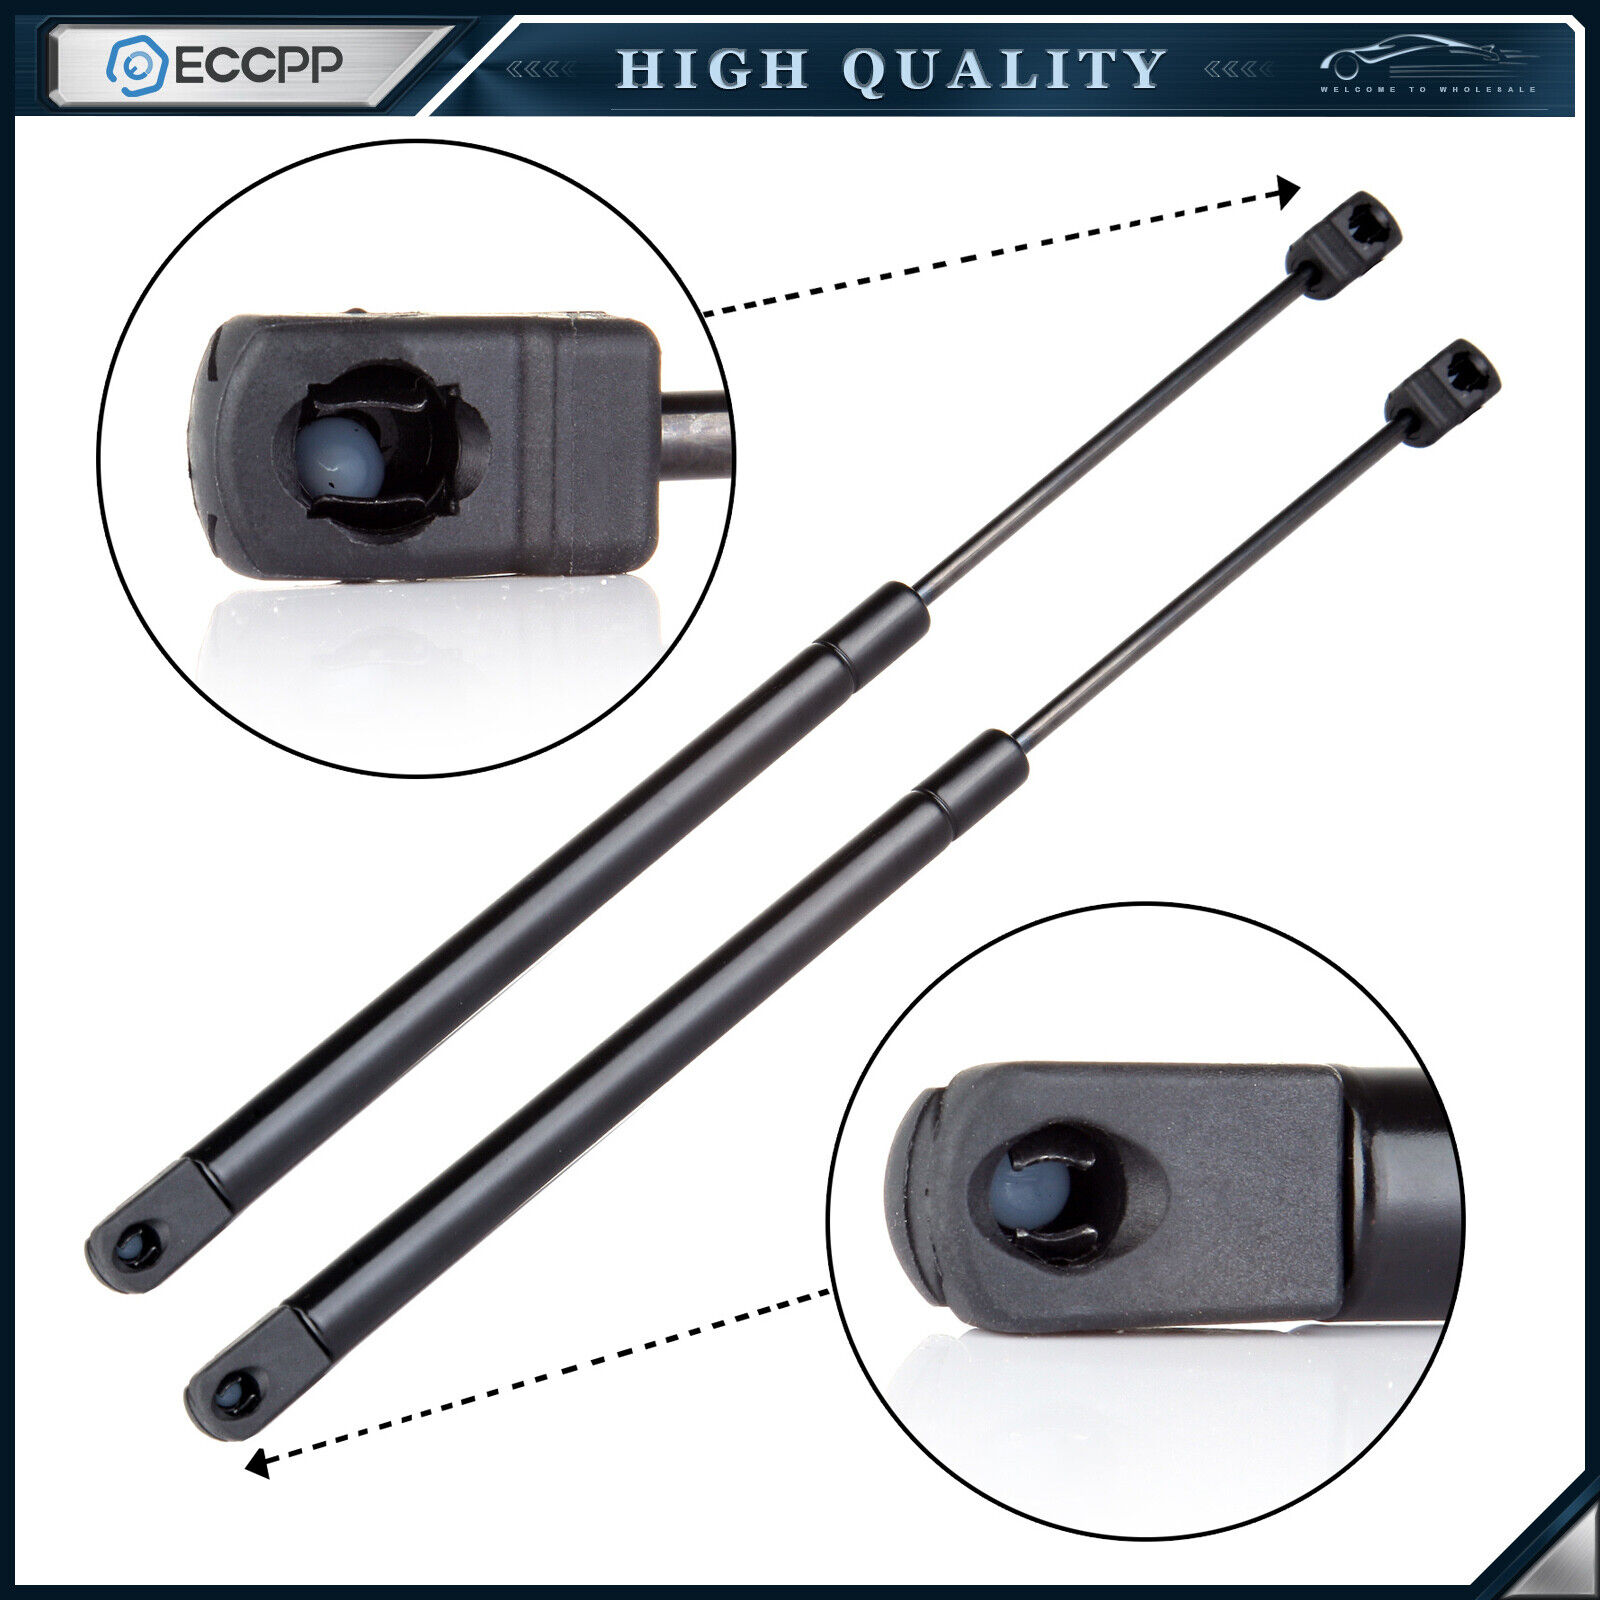 ECCPP 2x Front Hood Gas Lift Support Struts Spring For 2004-2008 Ford F-150 4153